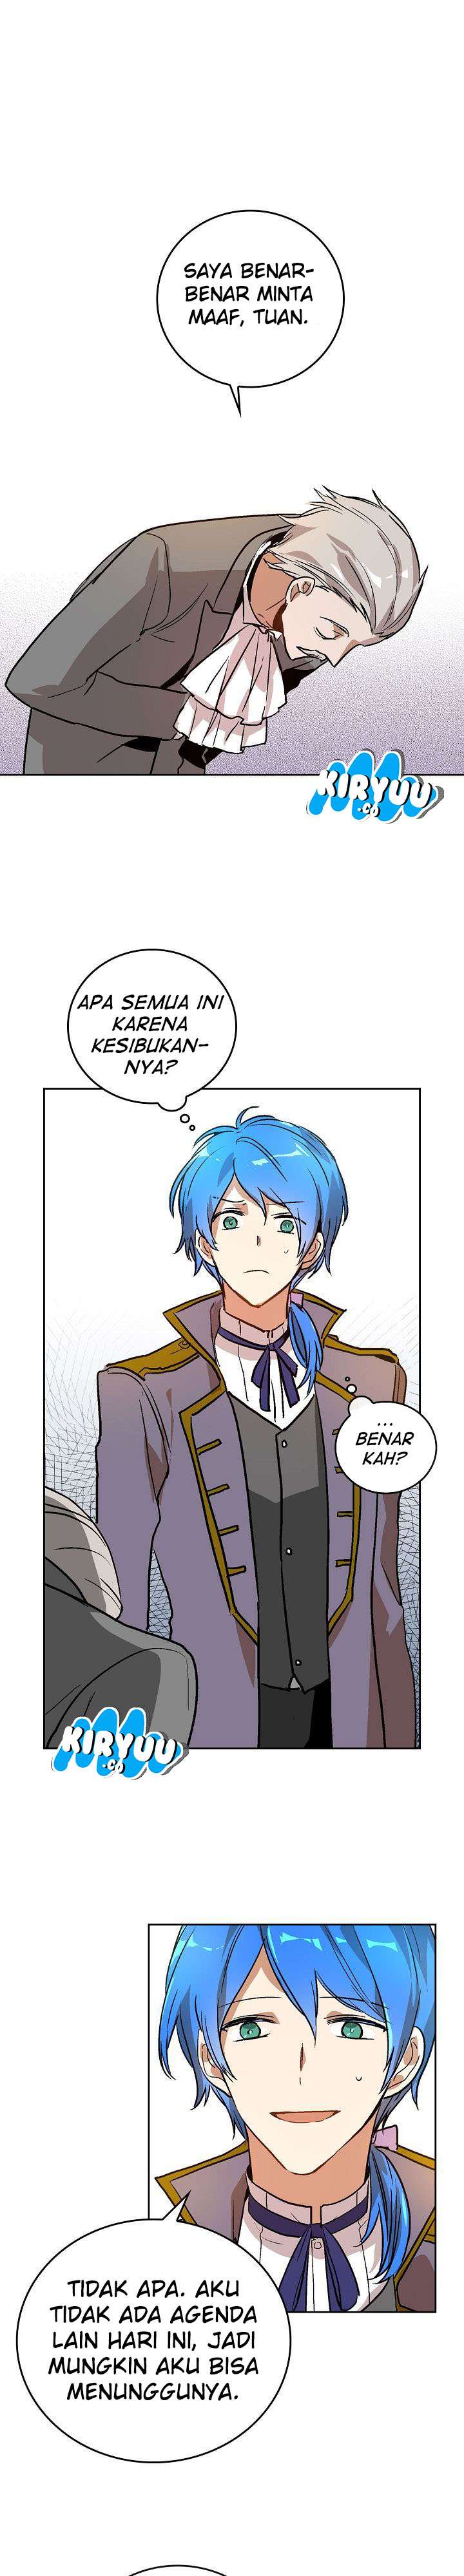 The Reason Why Raeliana Ended Up at the Duke’s Mansion Chapter 25 Bahasa Indonesia